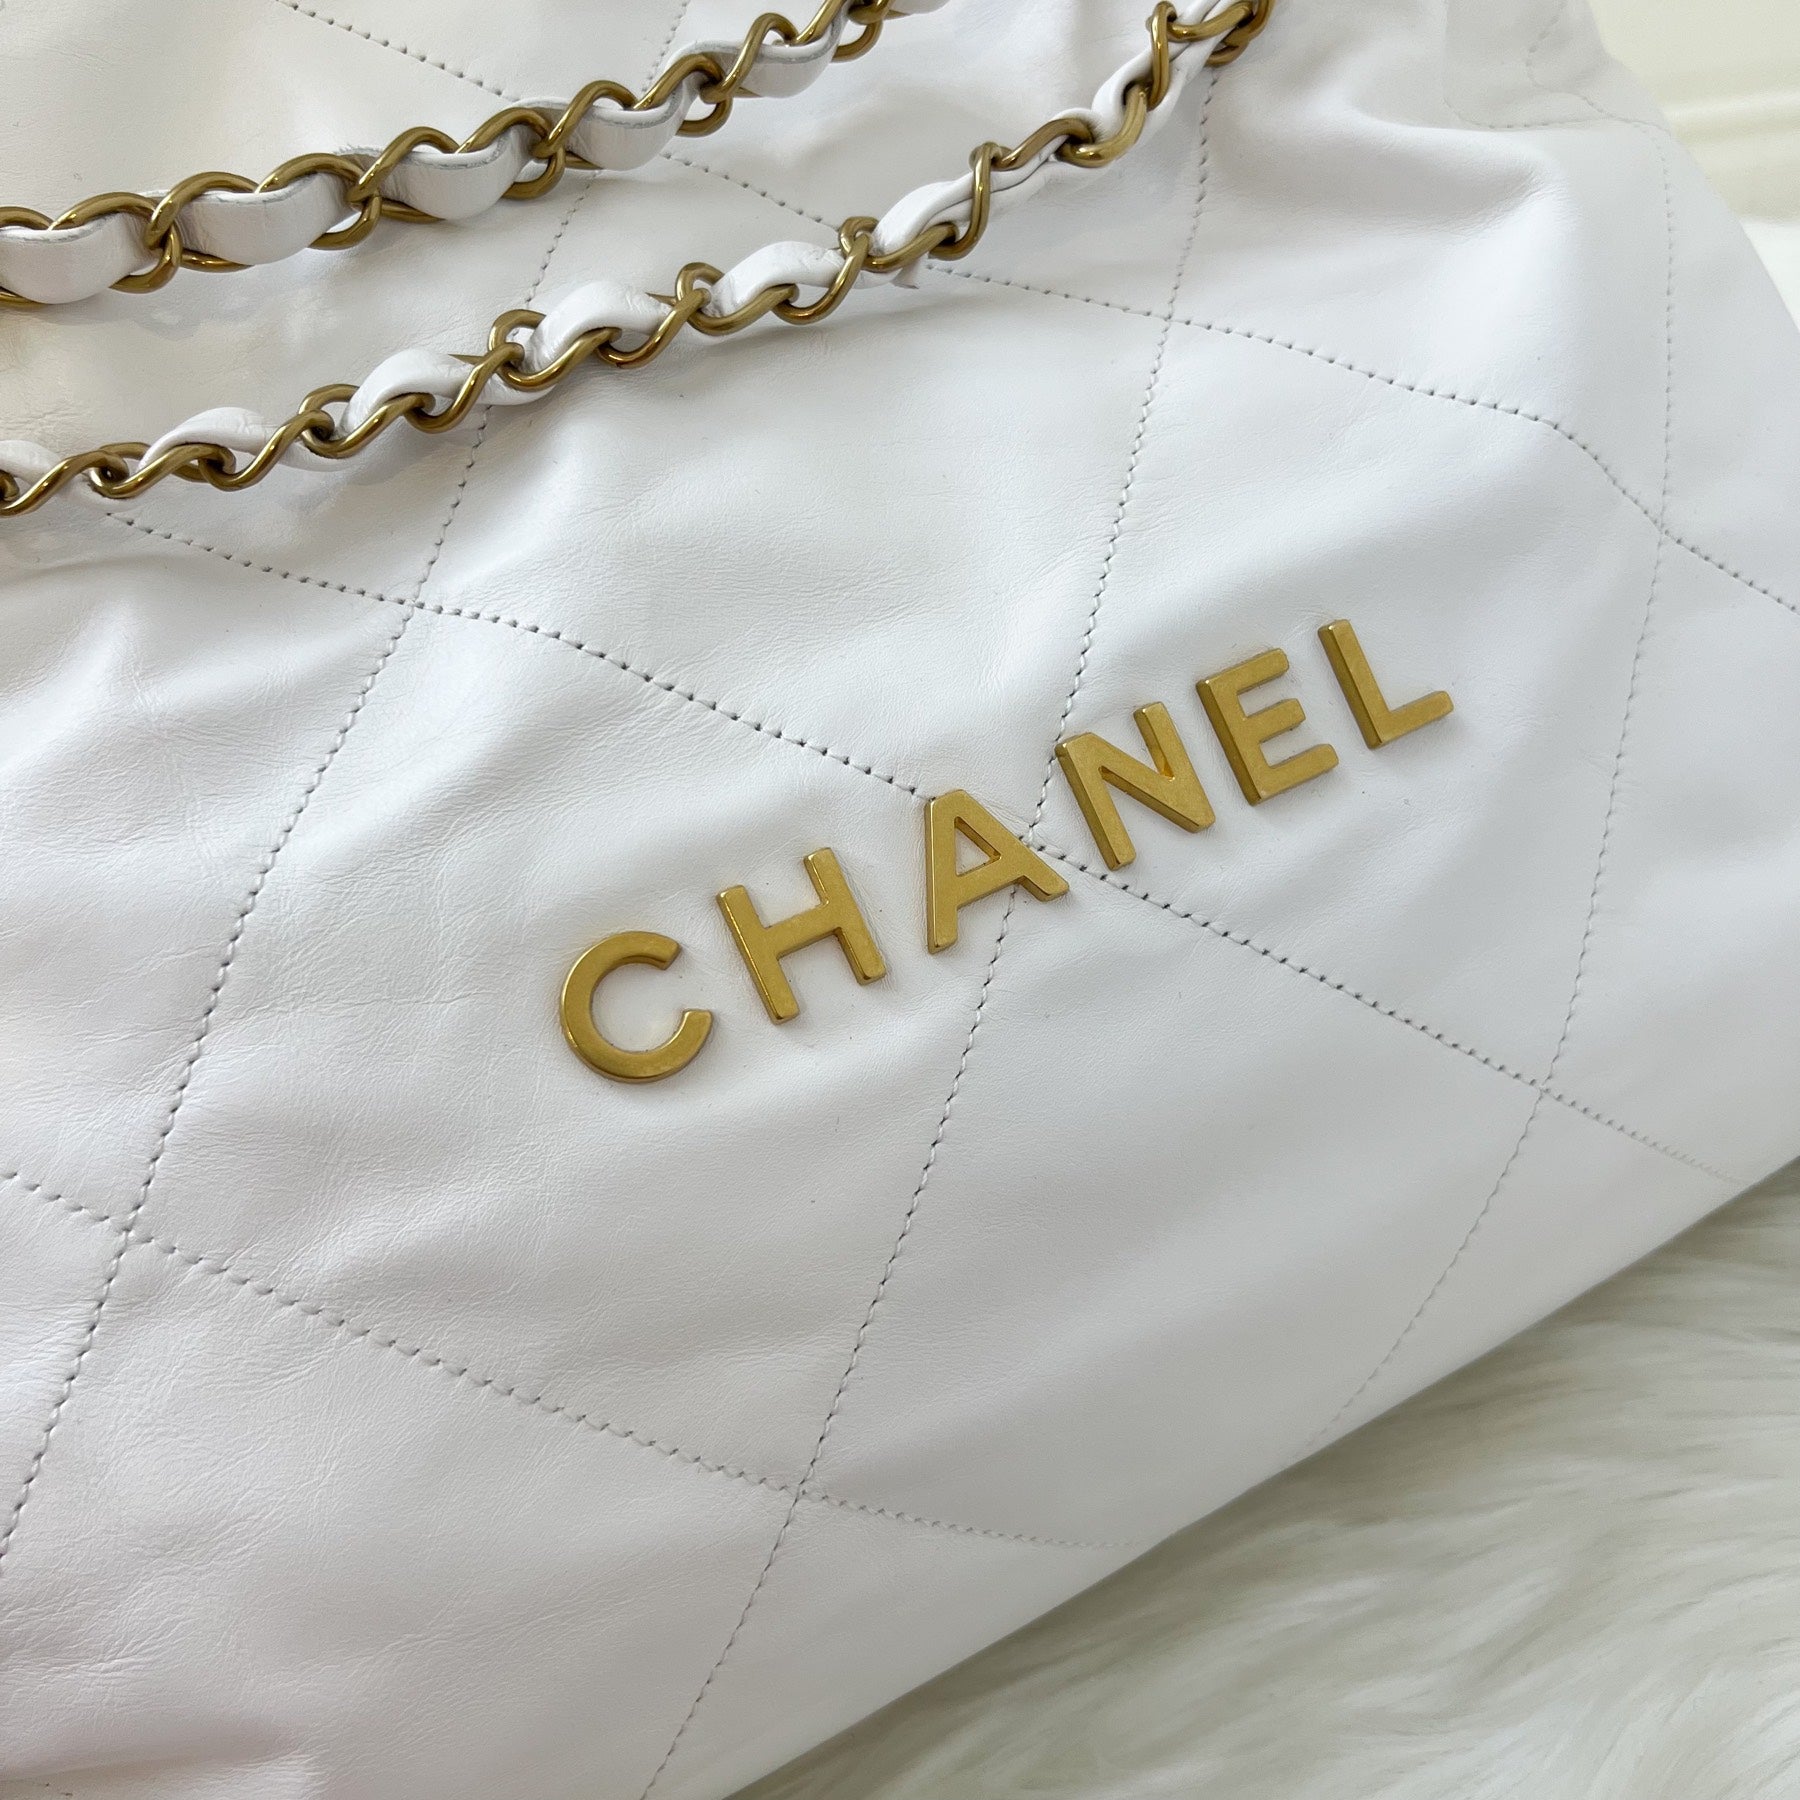 Chanel 22A Hobo Bag With Gold Coin In White - Praise To Heaven